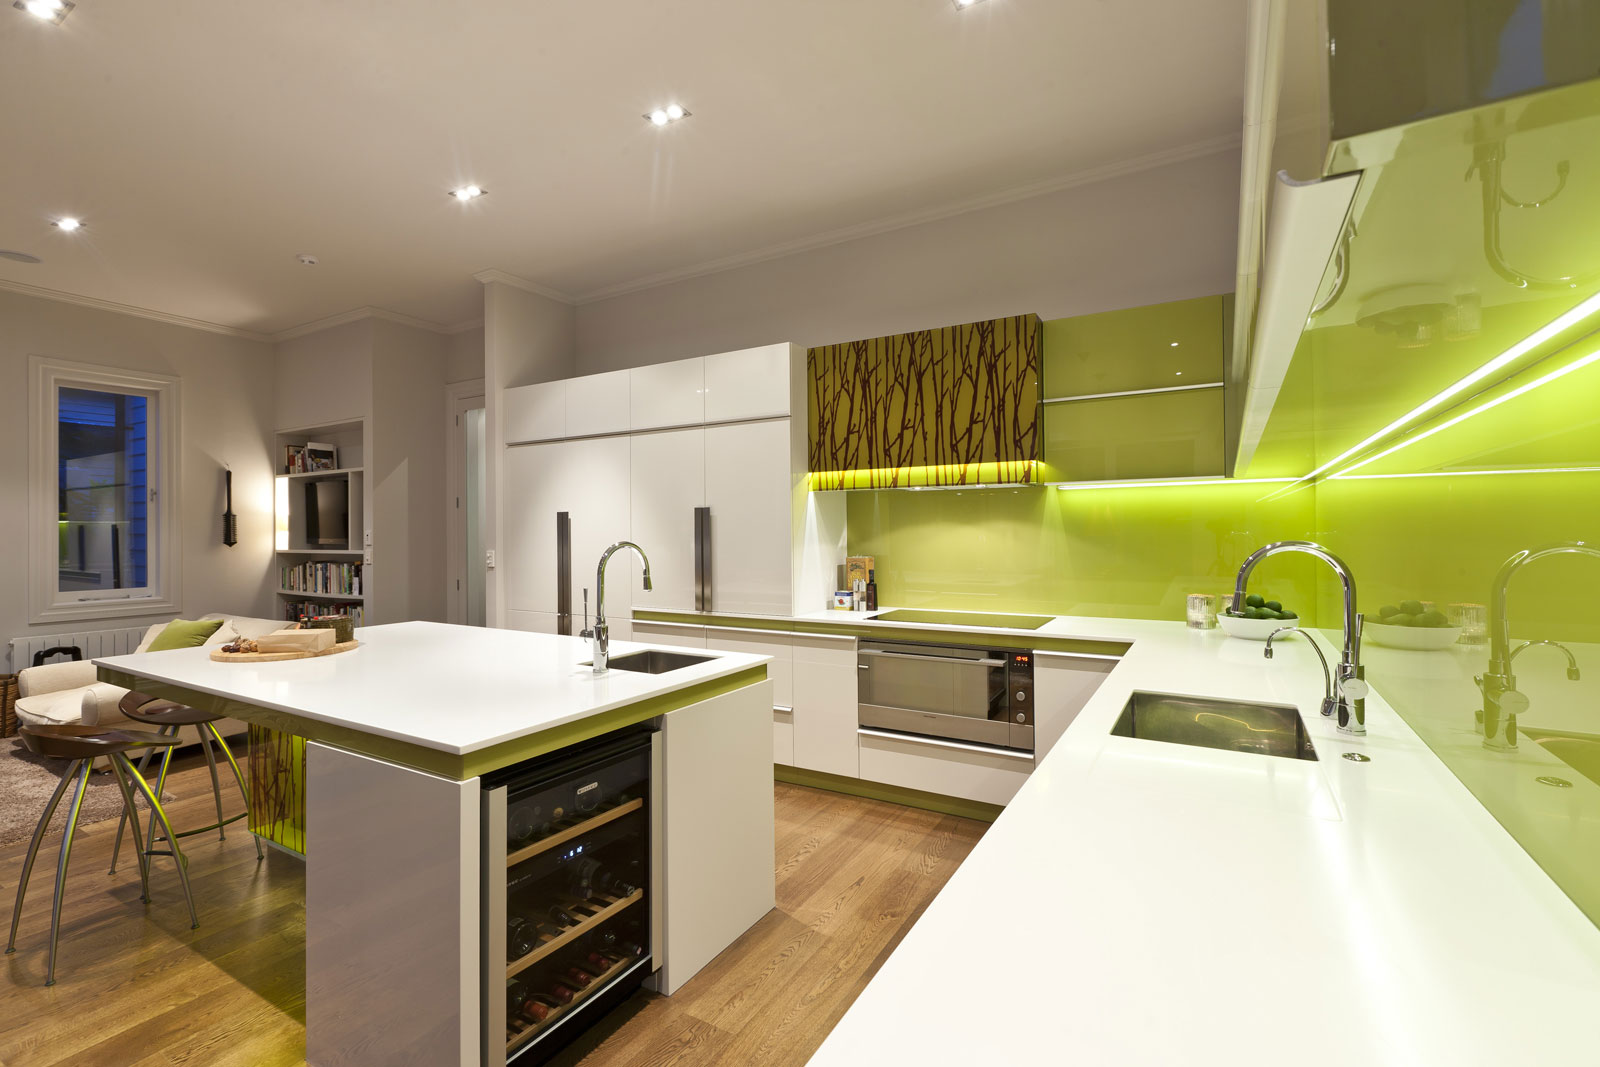 Kitchen with Colors, Lights, Design